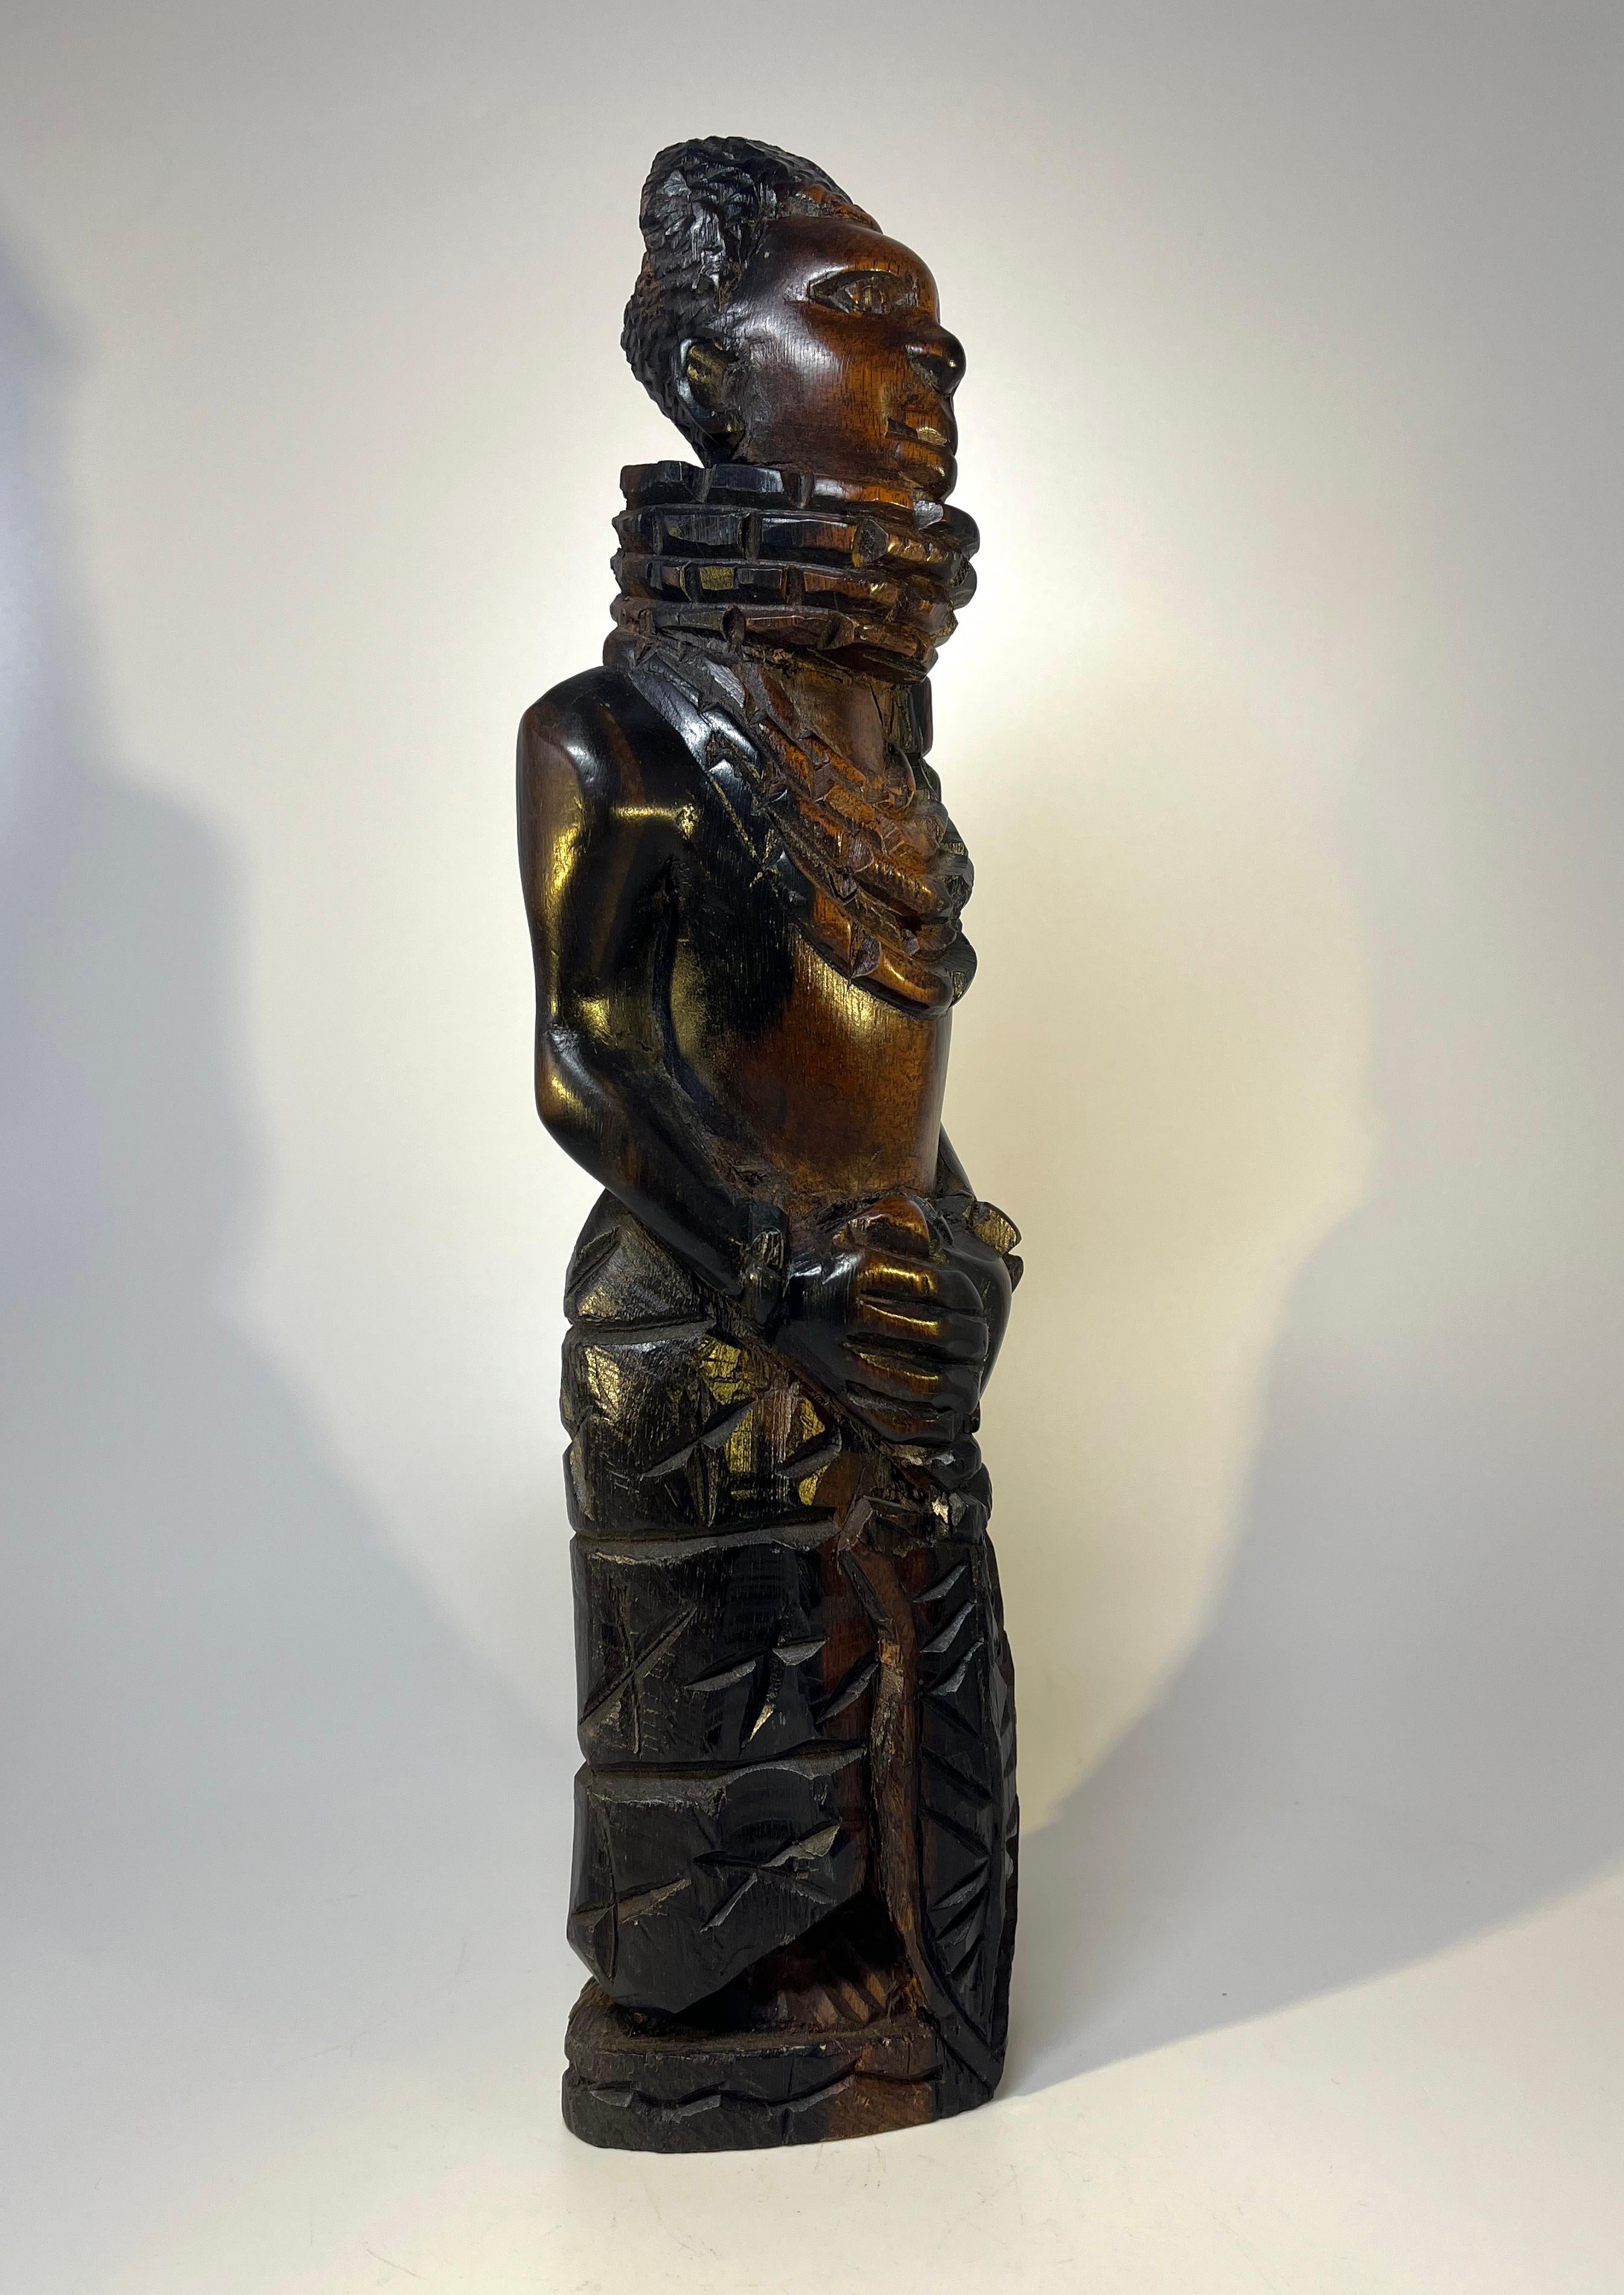 Benin Kingdom Ebony Carving of a Young King Oba, Nigerian For Sale 3